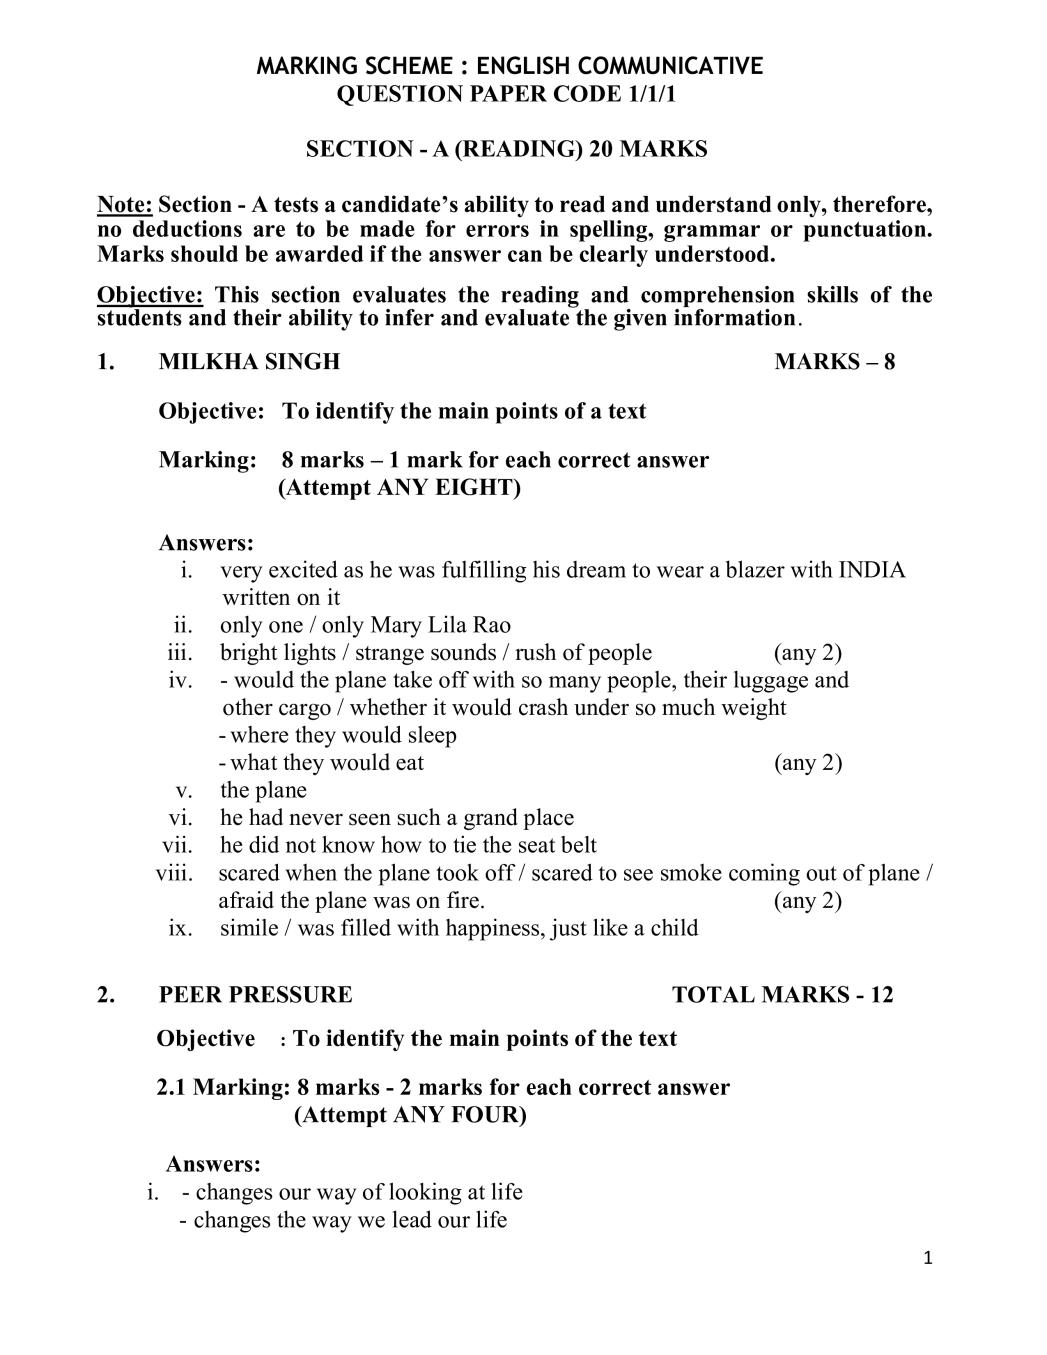 CBSE Class 10 English Communicative Question Paper 2019 Set 1 Solutions - Page 1